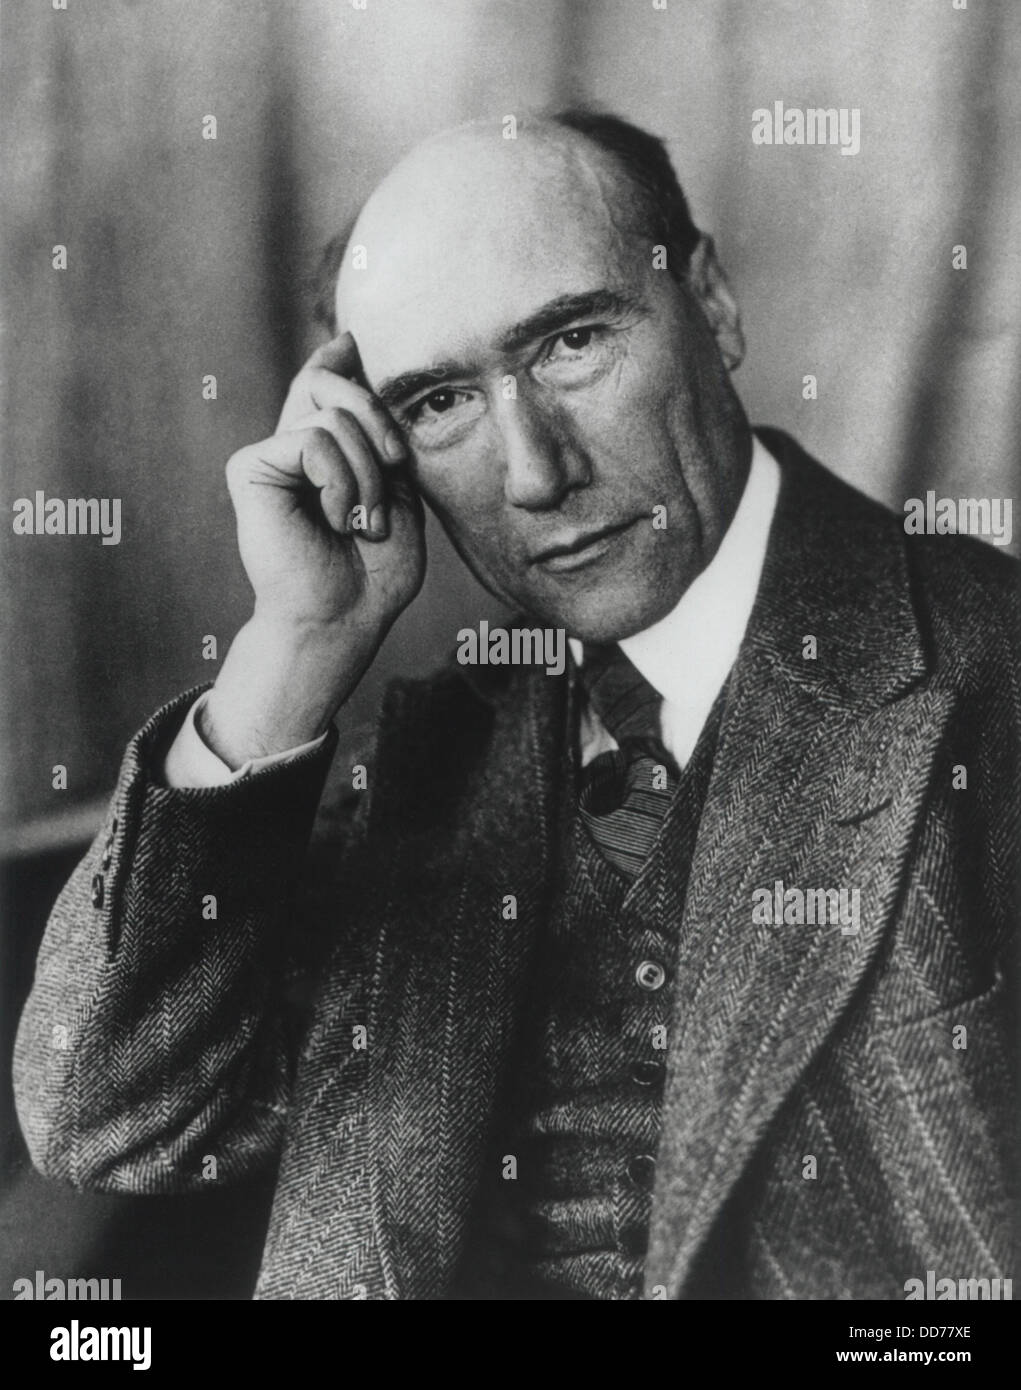 Andre Gide, a French author and winner of the Nobel Prize in literature in 1947. Photo ca. 1930. (BSLOC 2013 9 45) Stock Photo